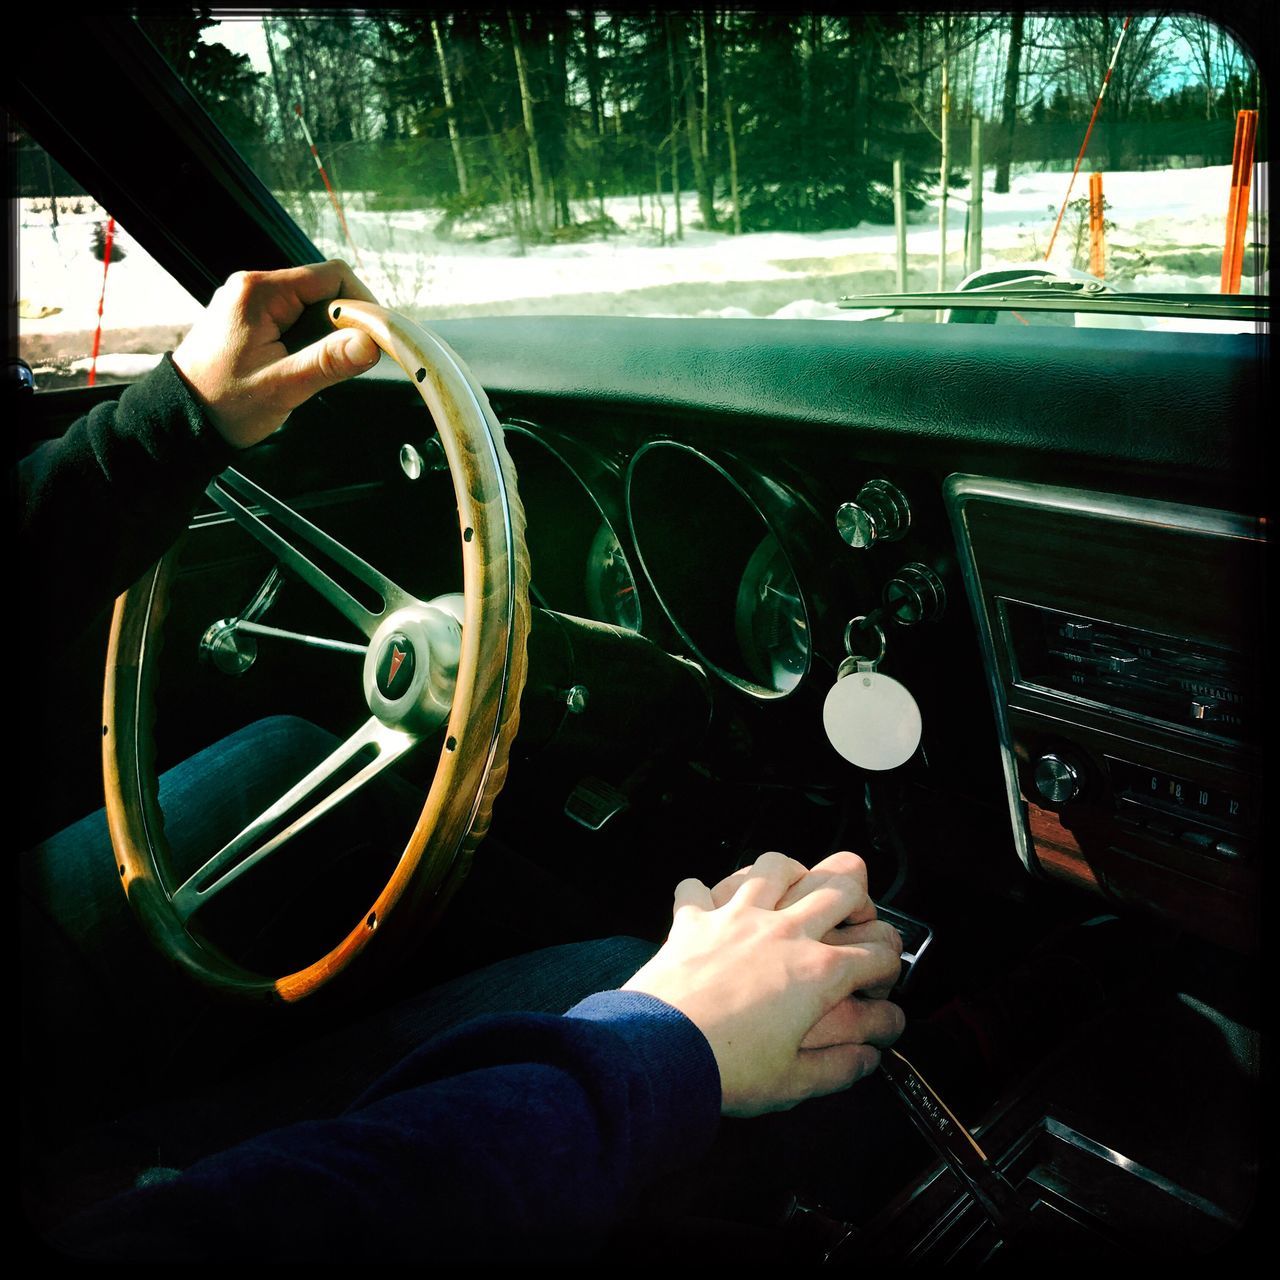 human hand, steering wheel, vehicle interior, transportation, one person, dashboard, human body part, driving, mode of transport, control, windshield, car interior, real people, car, holding, men, speedometer, control panel, indoors, day, close-up, cockpit, piloting, one man only, gauge, people